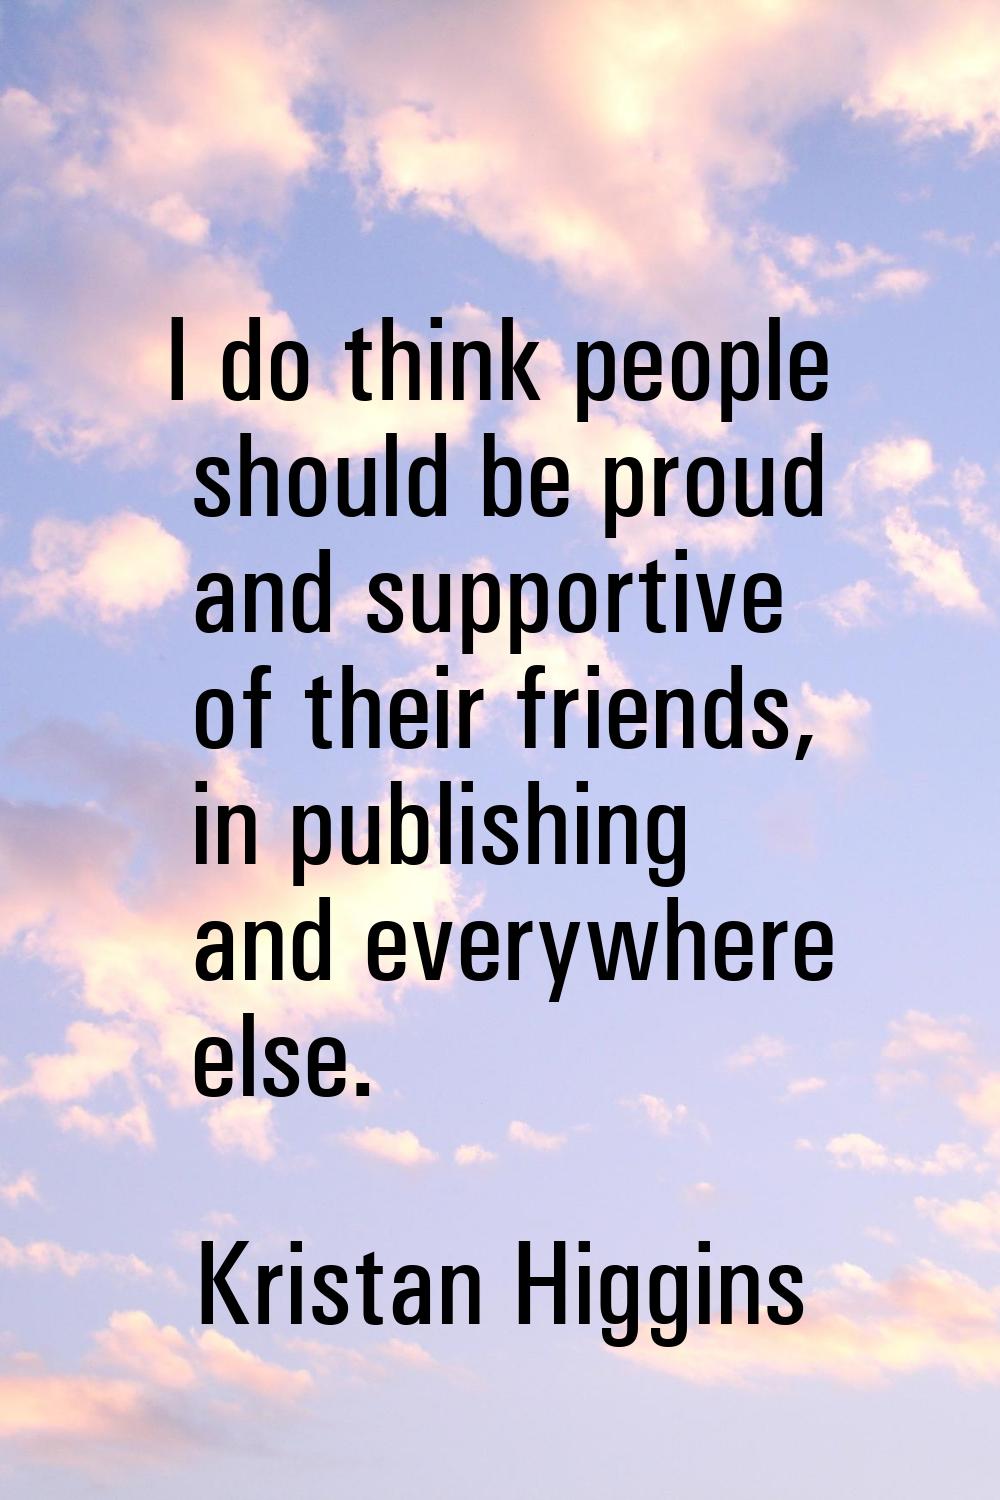 I do think people should be proud and supportive of their friends, in publishing and everywhere els